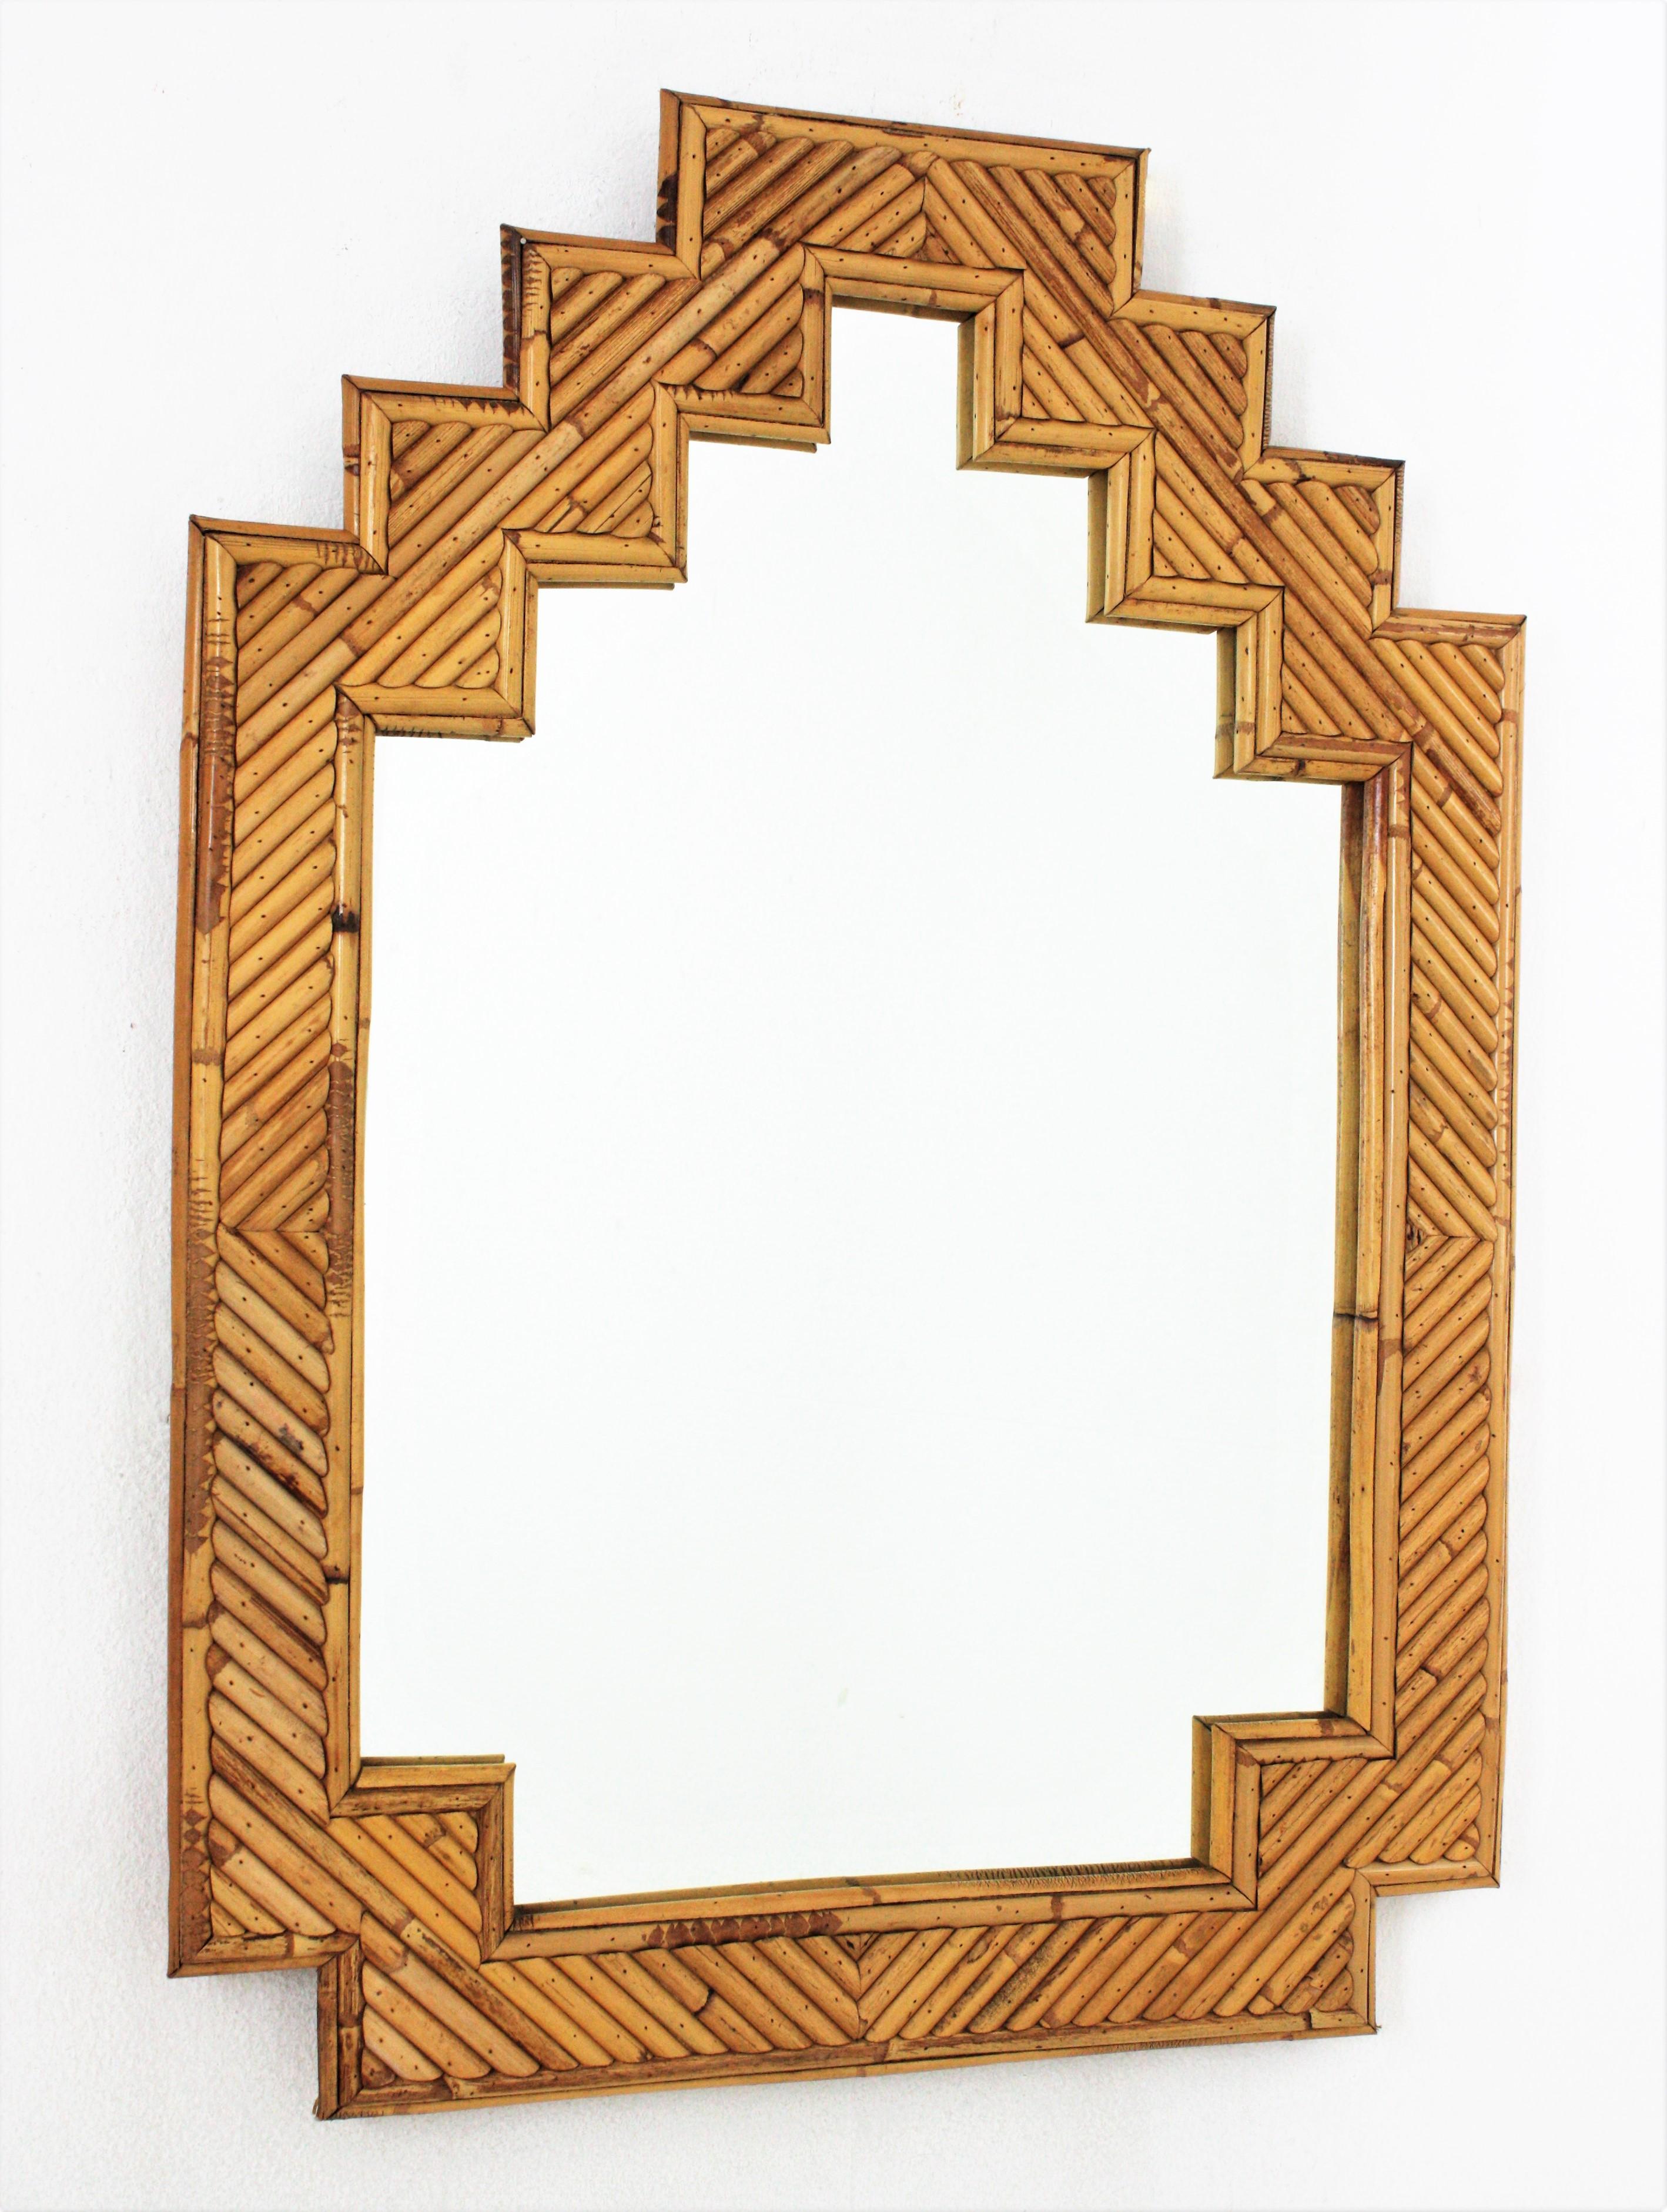 Eye-caching split reed rattan mirror with staggered top. Attributed to Vivai del Sud. Italy, 1960s.
Its design combines Midcentury and Oriental accents.
It will be a nice addition to be used in a bathroom or as wall mirror / console mirror in any